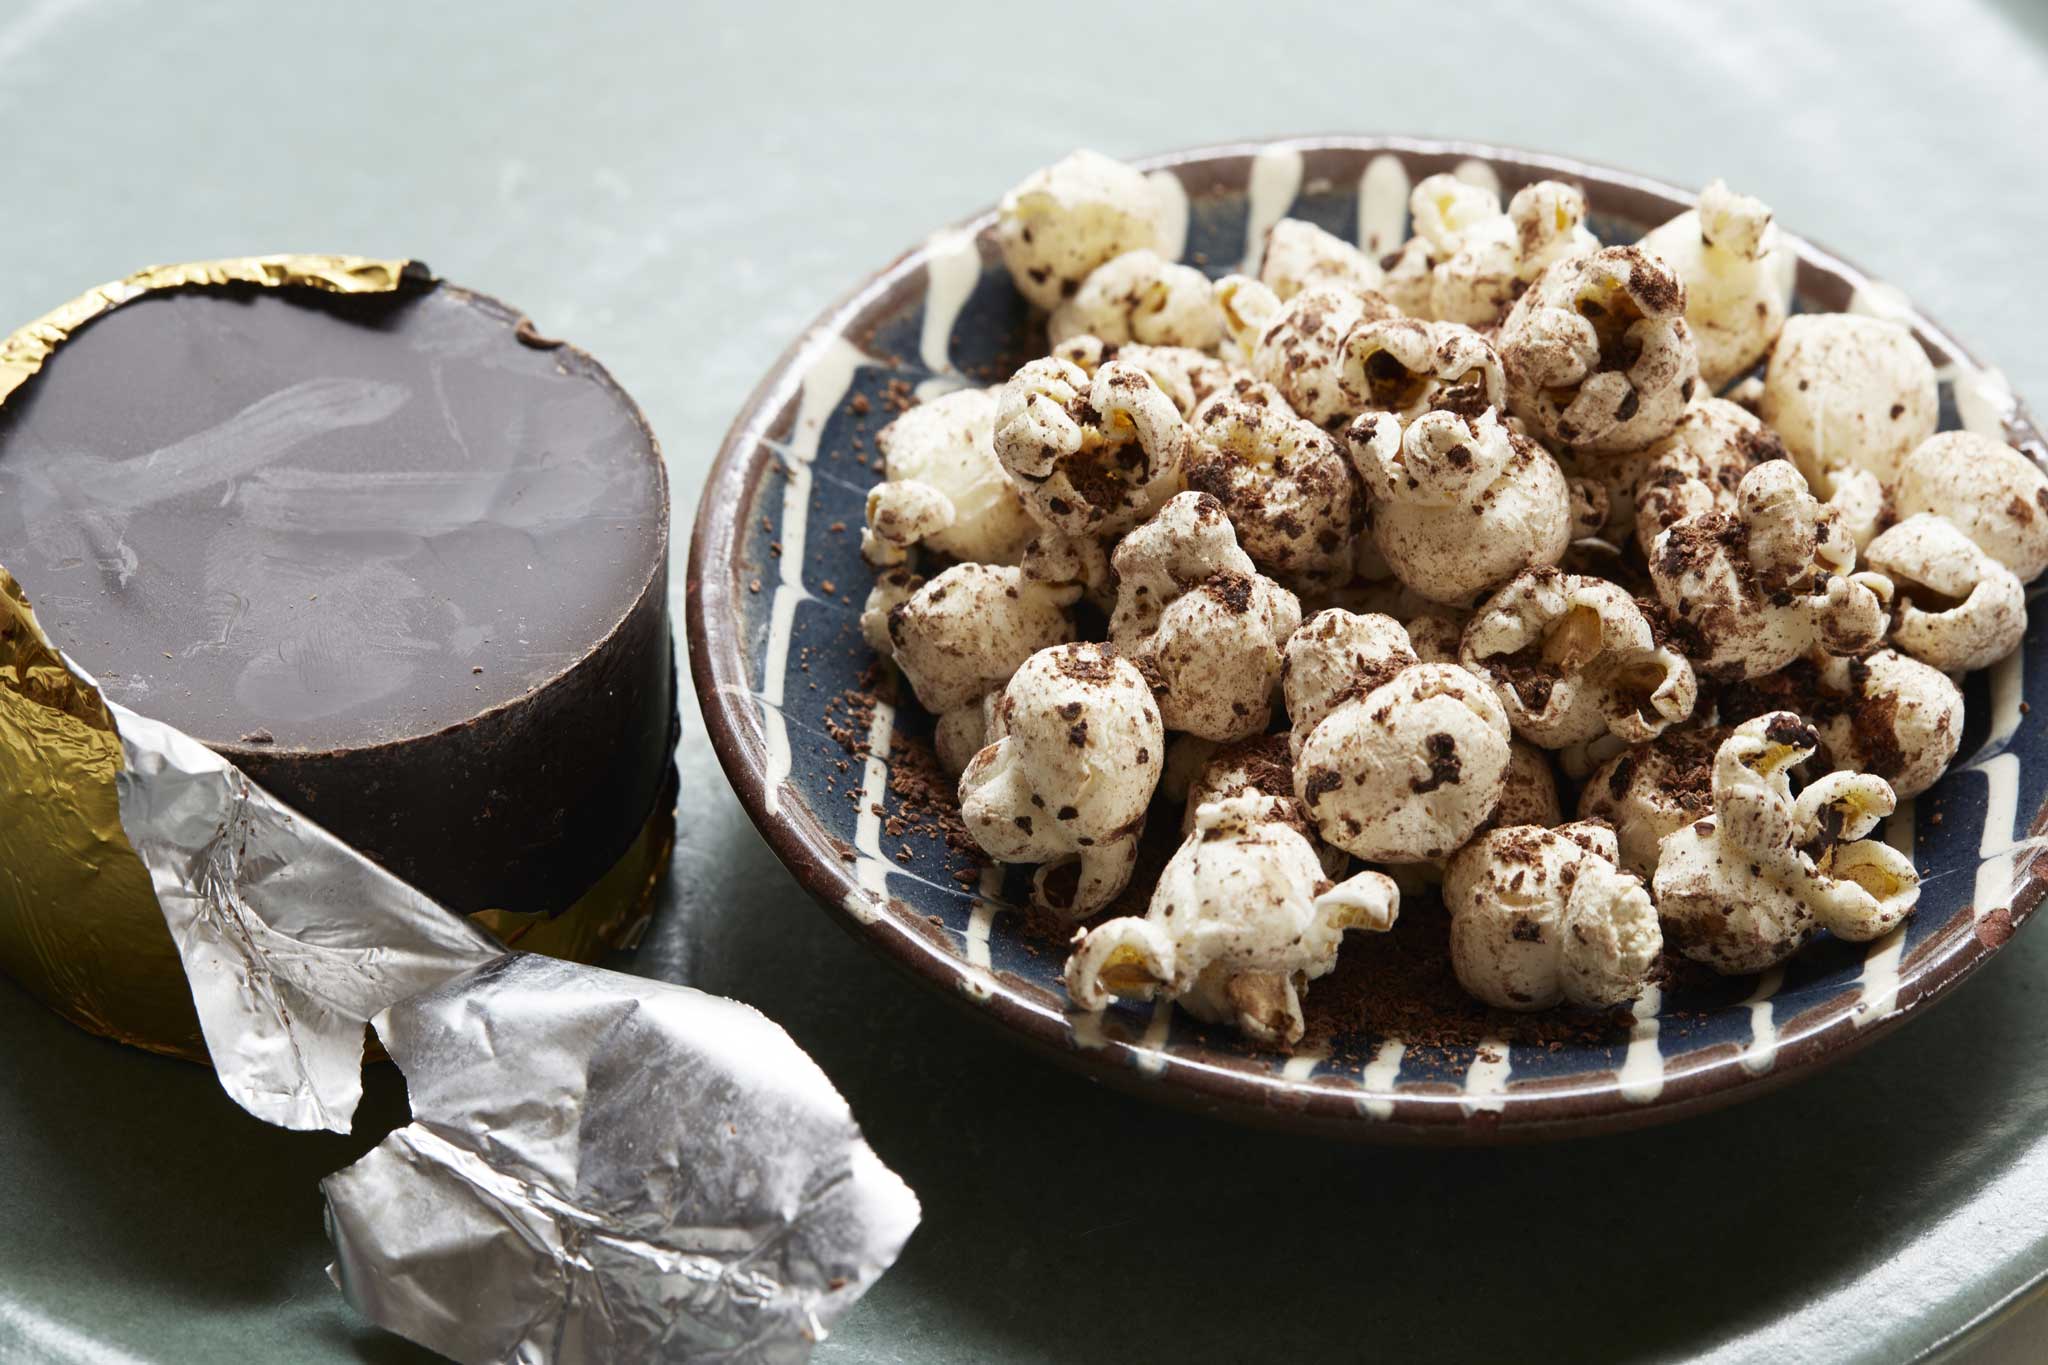 Great intensity: Mark uses Willie Harcourt-Cooze's 100% Venezuelan Black chocolate for this popcorn